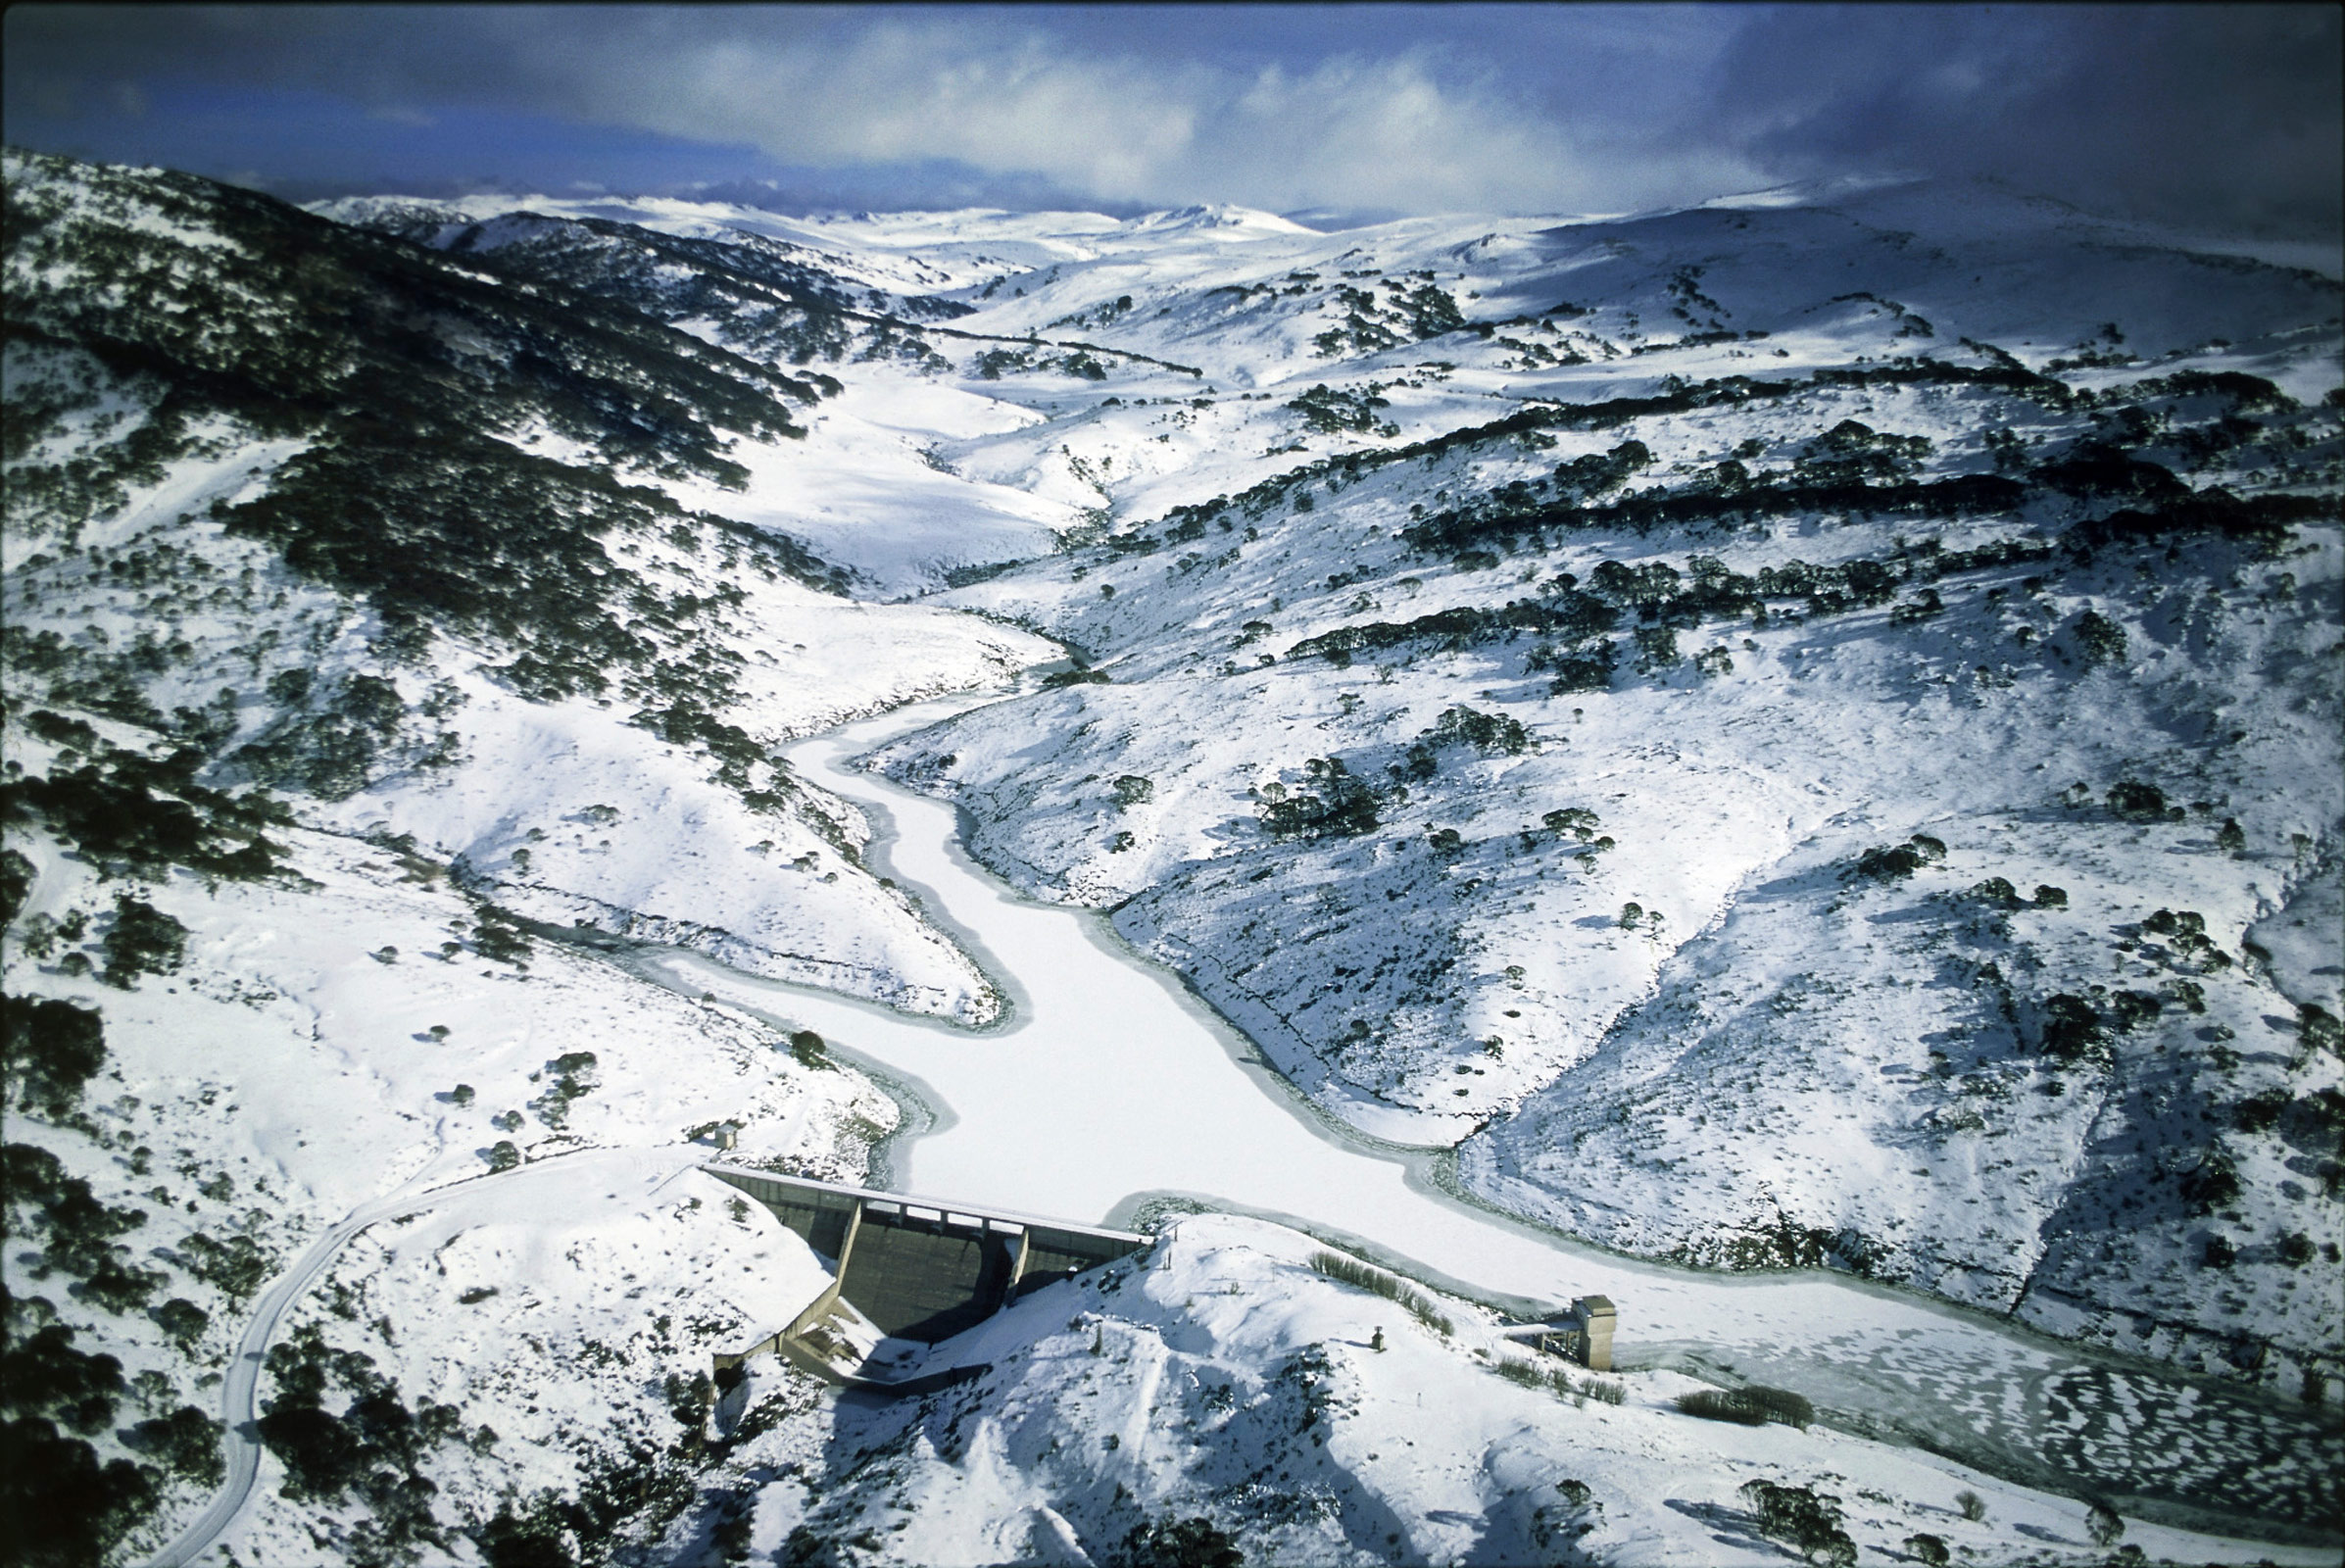 Guthega Dam on the Snowy River, in the Snowy Mountains, New South Wales